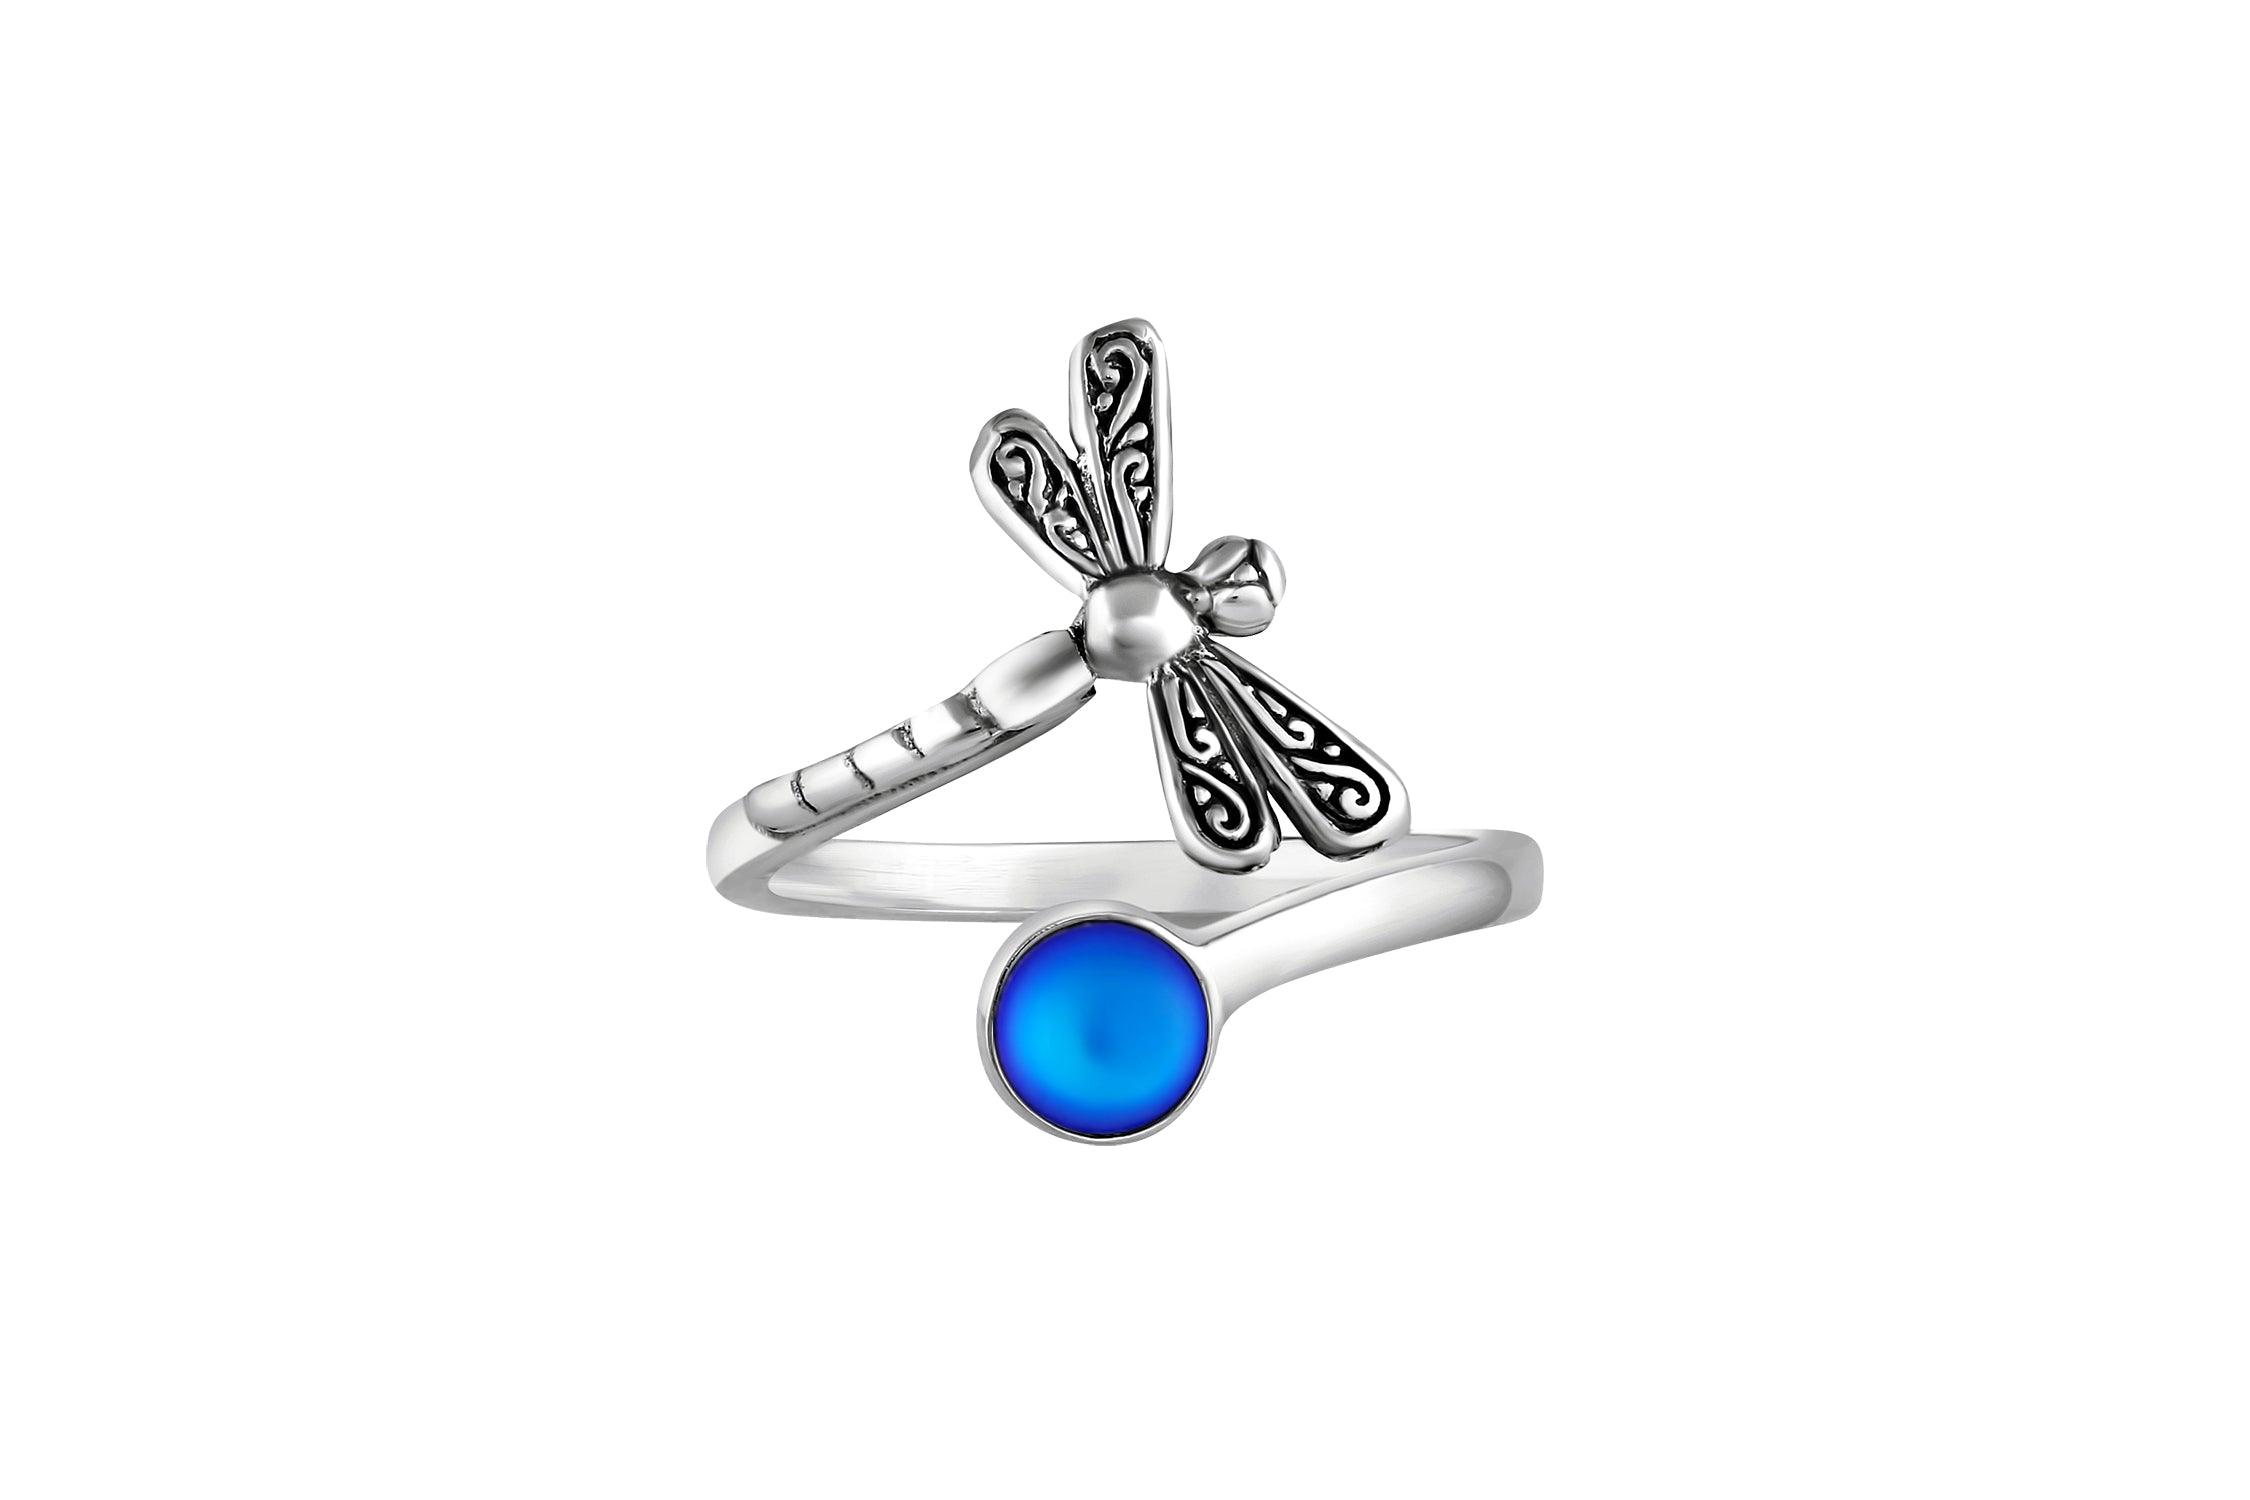 Buy Premium Sterling Silver Dragonfly Ring by LeightWorks